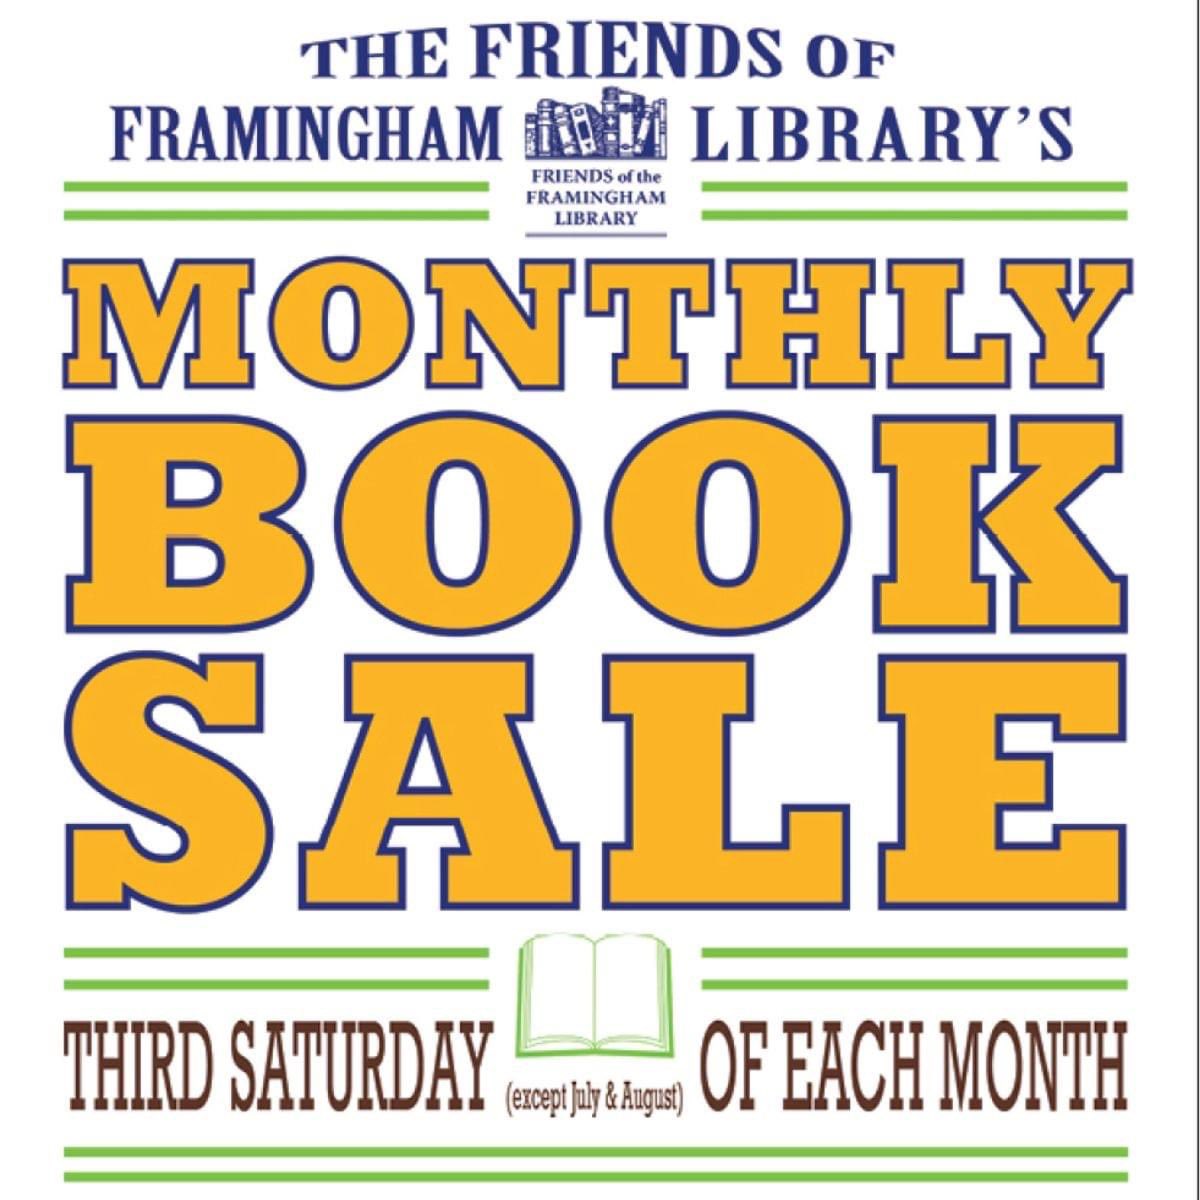 Hello neighbors. Come one, come all, this Saturday (tomorrow)
to The Friends of Framingham Library book sale.

This is a wonderful event for the entire family. So bring the children. 

See you there 😊📚📖

#framinghamma #framingham #framinghamlibrary #framinghamMassachusetts